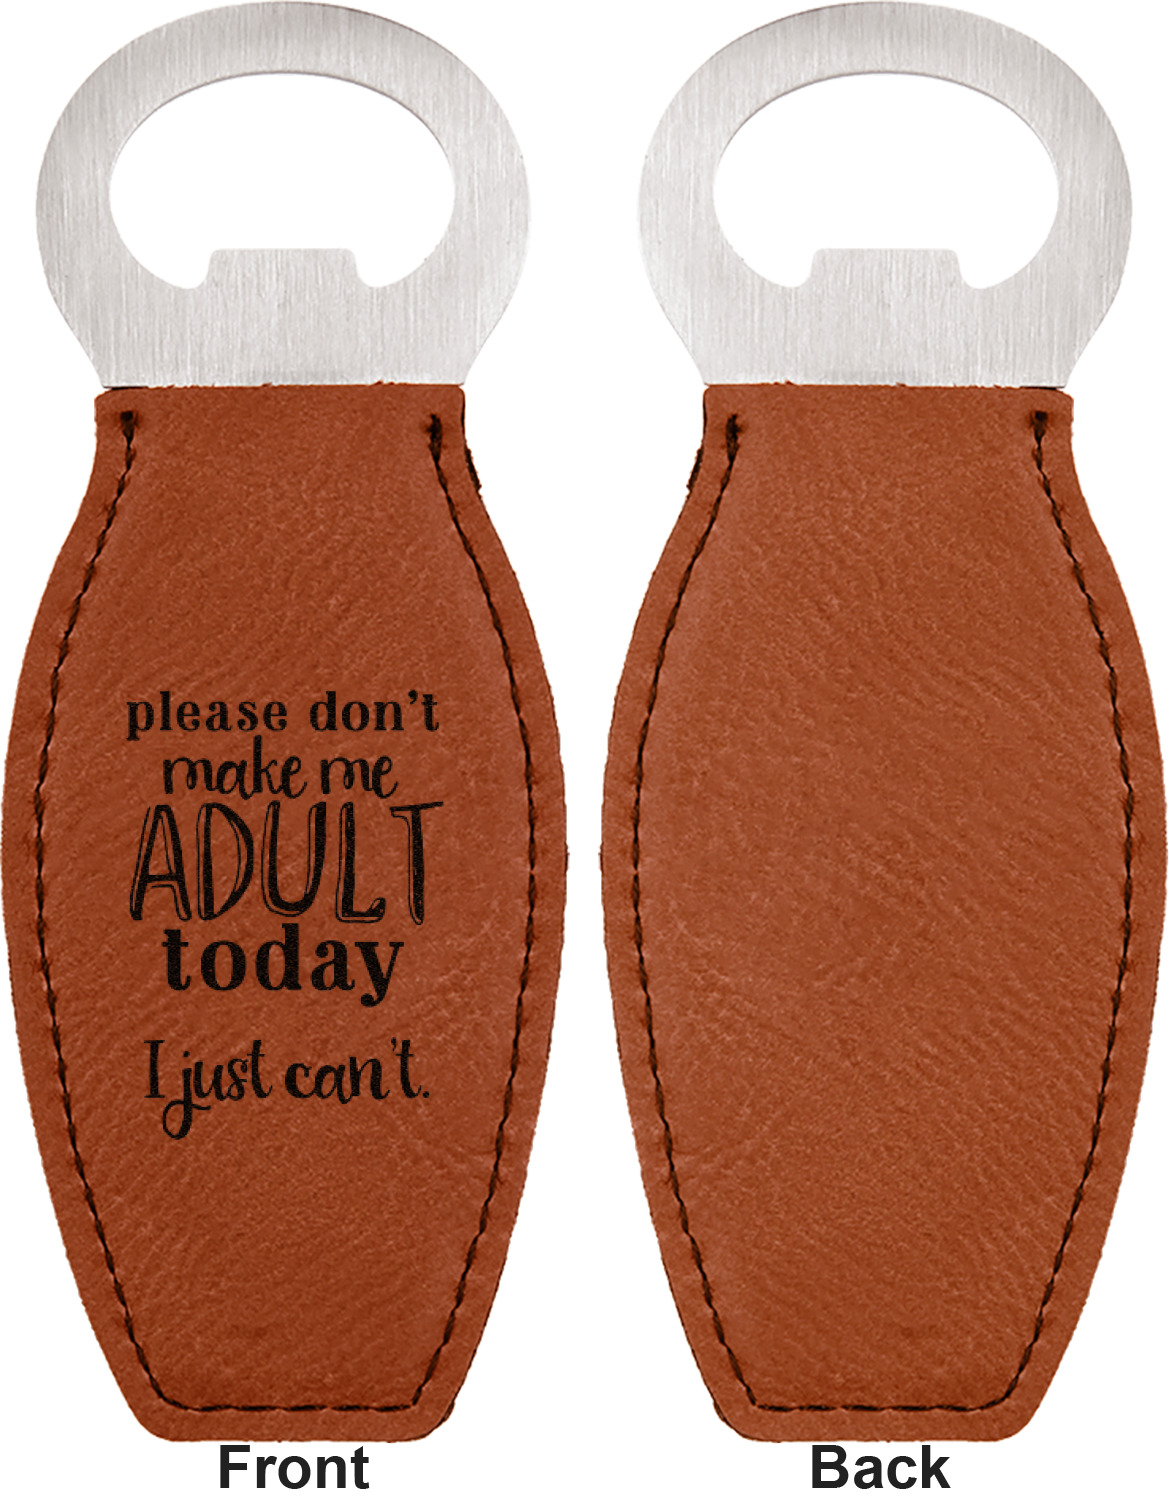 https://www.youcustomizeit.com/common/MAKE/1038321/Funny-Quotes-and-Sayings-Leather-Bar-Bottle-Opener-Front-and-Back-single-sided.jpg?lm=1647553706